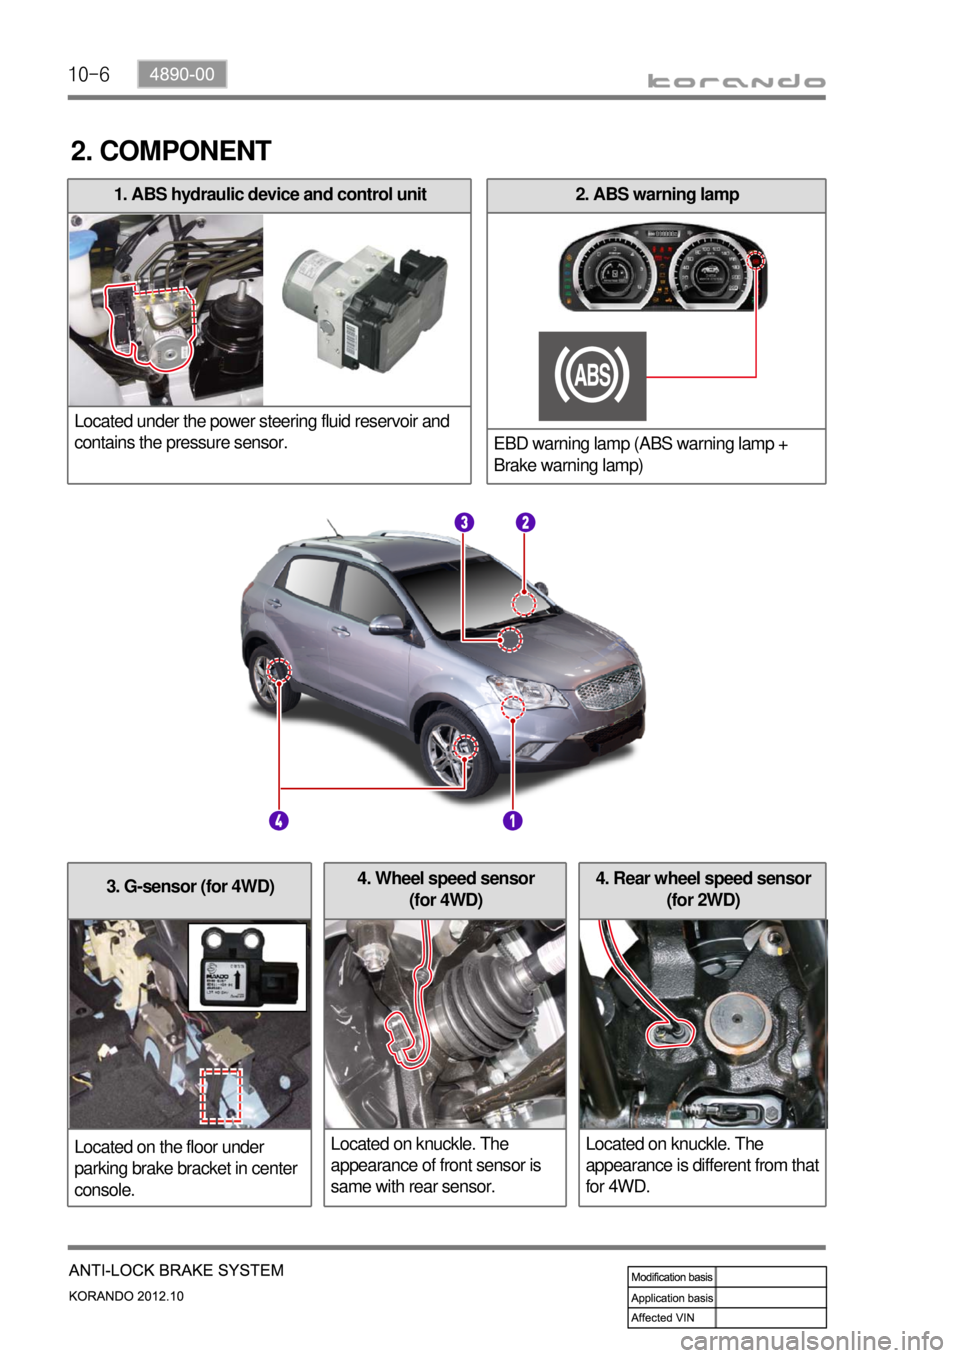 SSANGYONG KORANDO 2012  Service Manual 10-6
3. G-sensor (for 4WD)
Located on the floor under 
parking brake bracket in center 
console.4. Rear wheel speed sensor 
(for 2WD)
Located on knuckle. The 
appearance is different from that 
for 4W